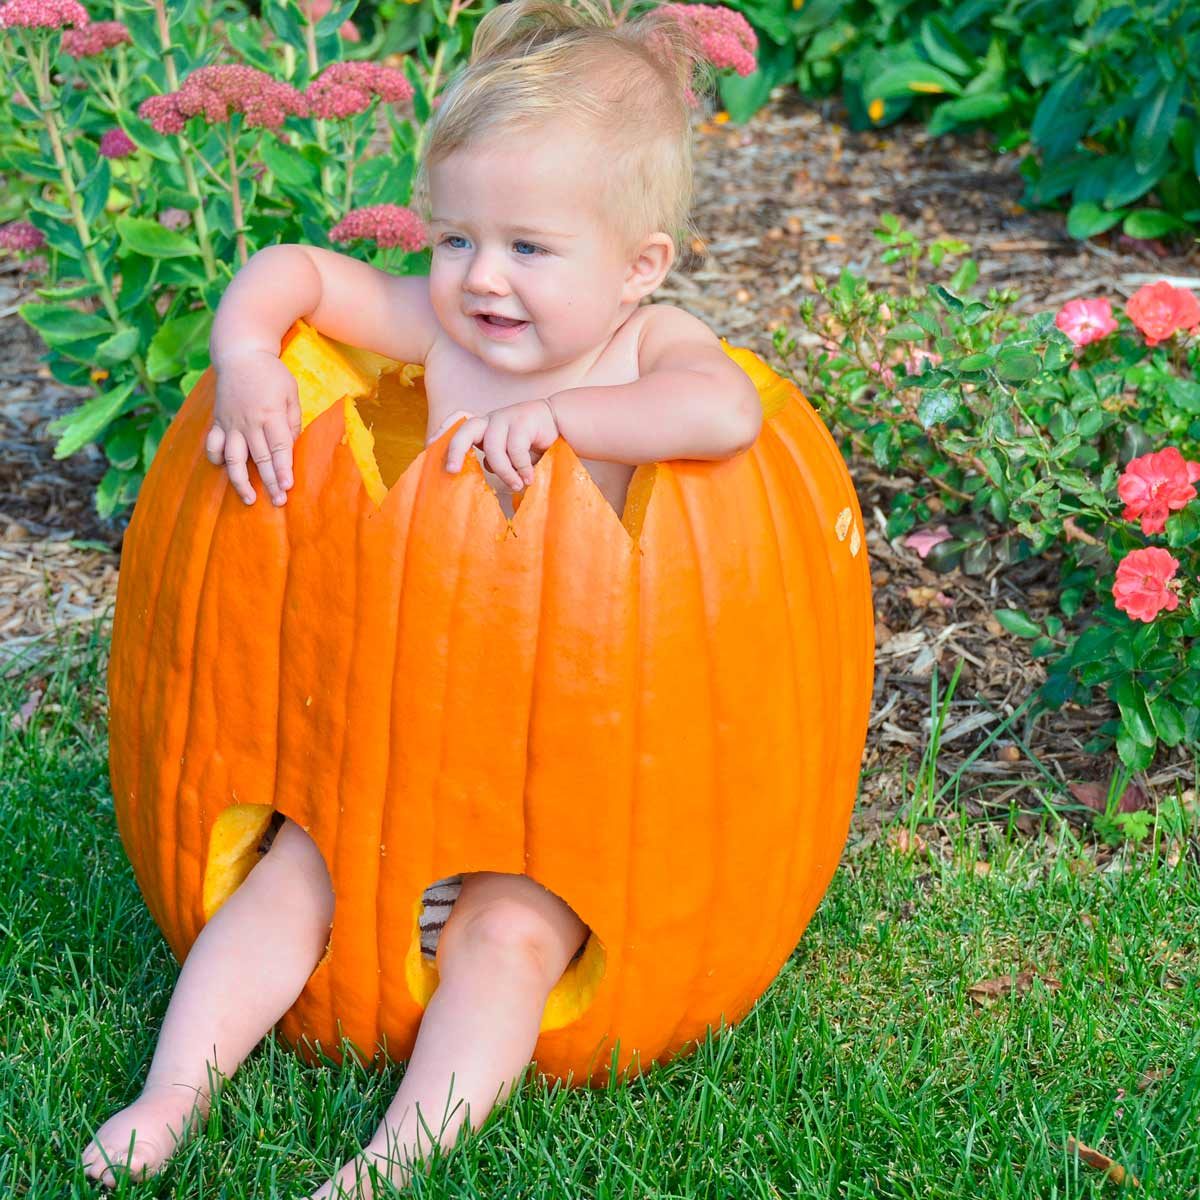 20-pumpkin-carving-ideas-to-inspire-you-this-halloween-family-handyman